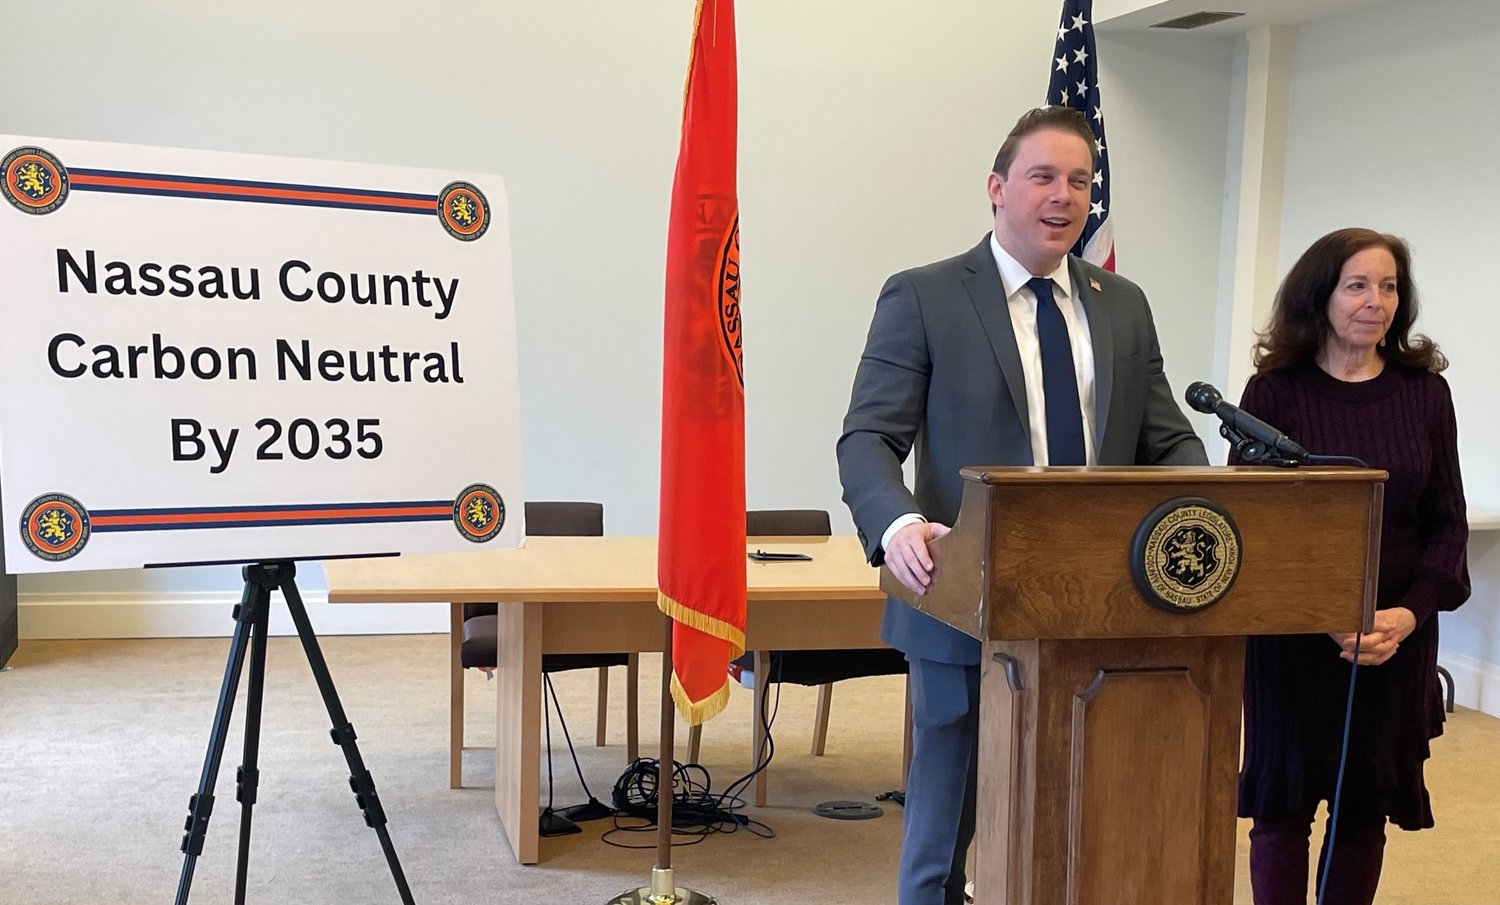 Legislator Josh Lafazan, joined by Adrienne Esposito, executive director of Citizens Campaign for the Environment, announced the introduction of a bill that would require Nassau County to become carbon-neutral by 2035.